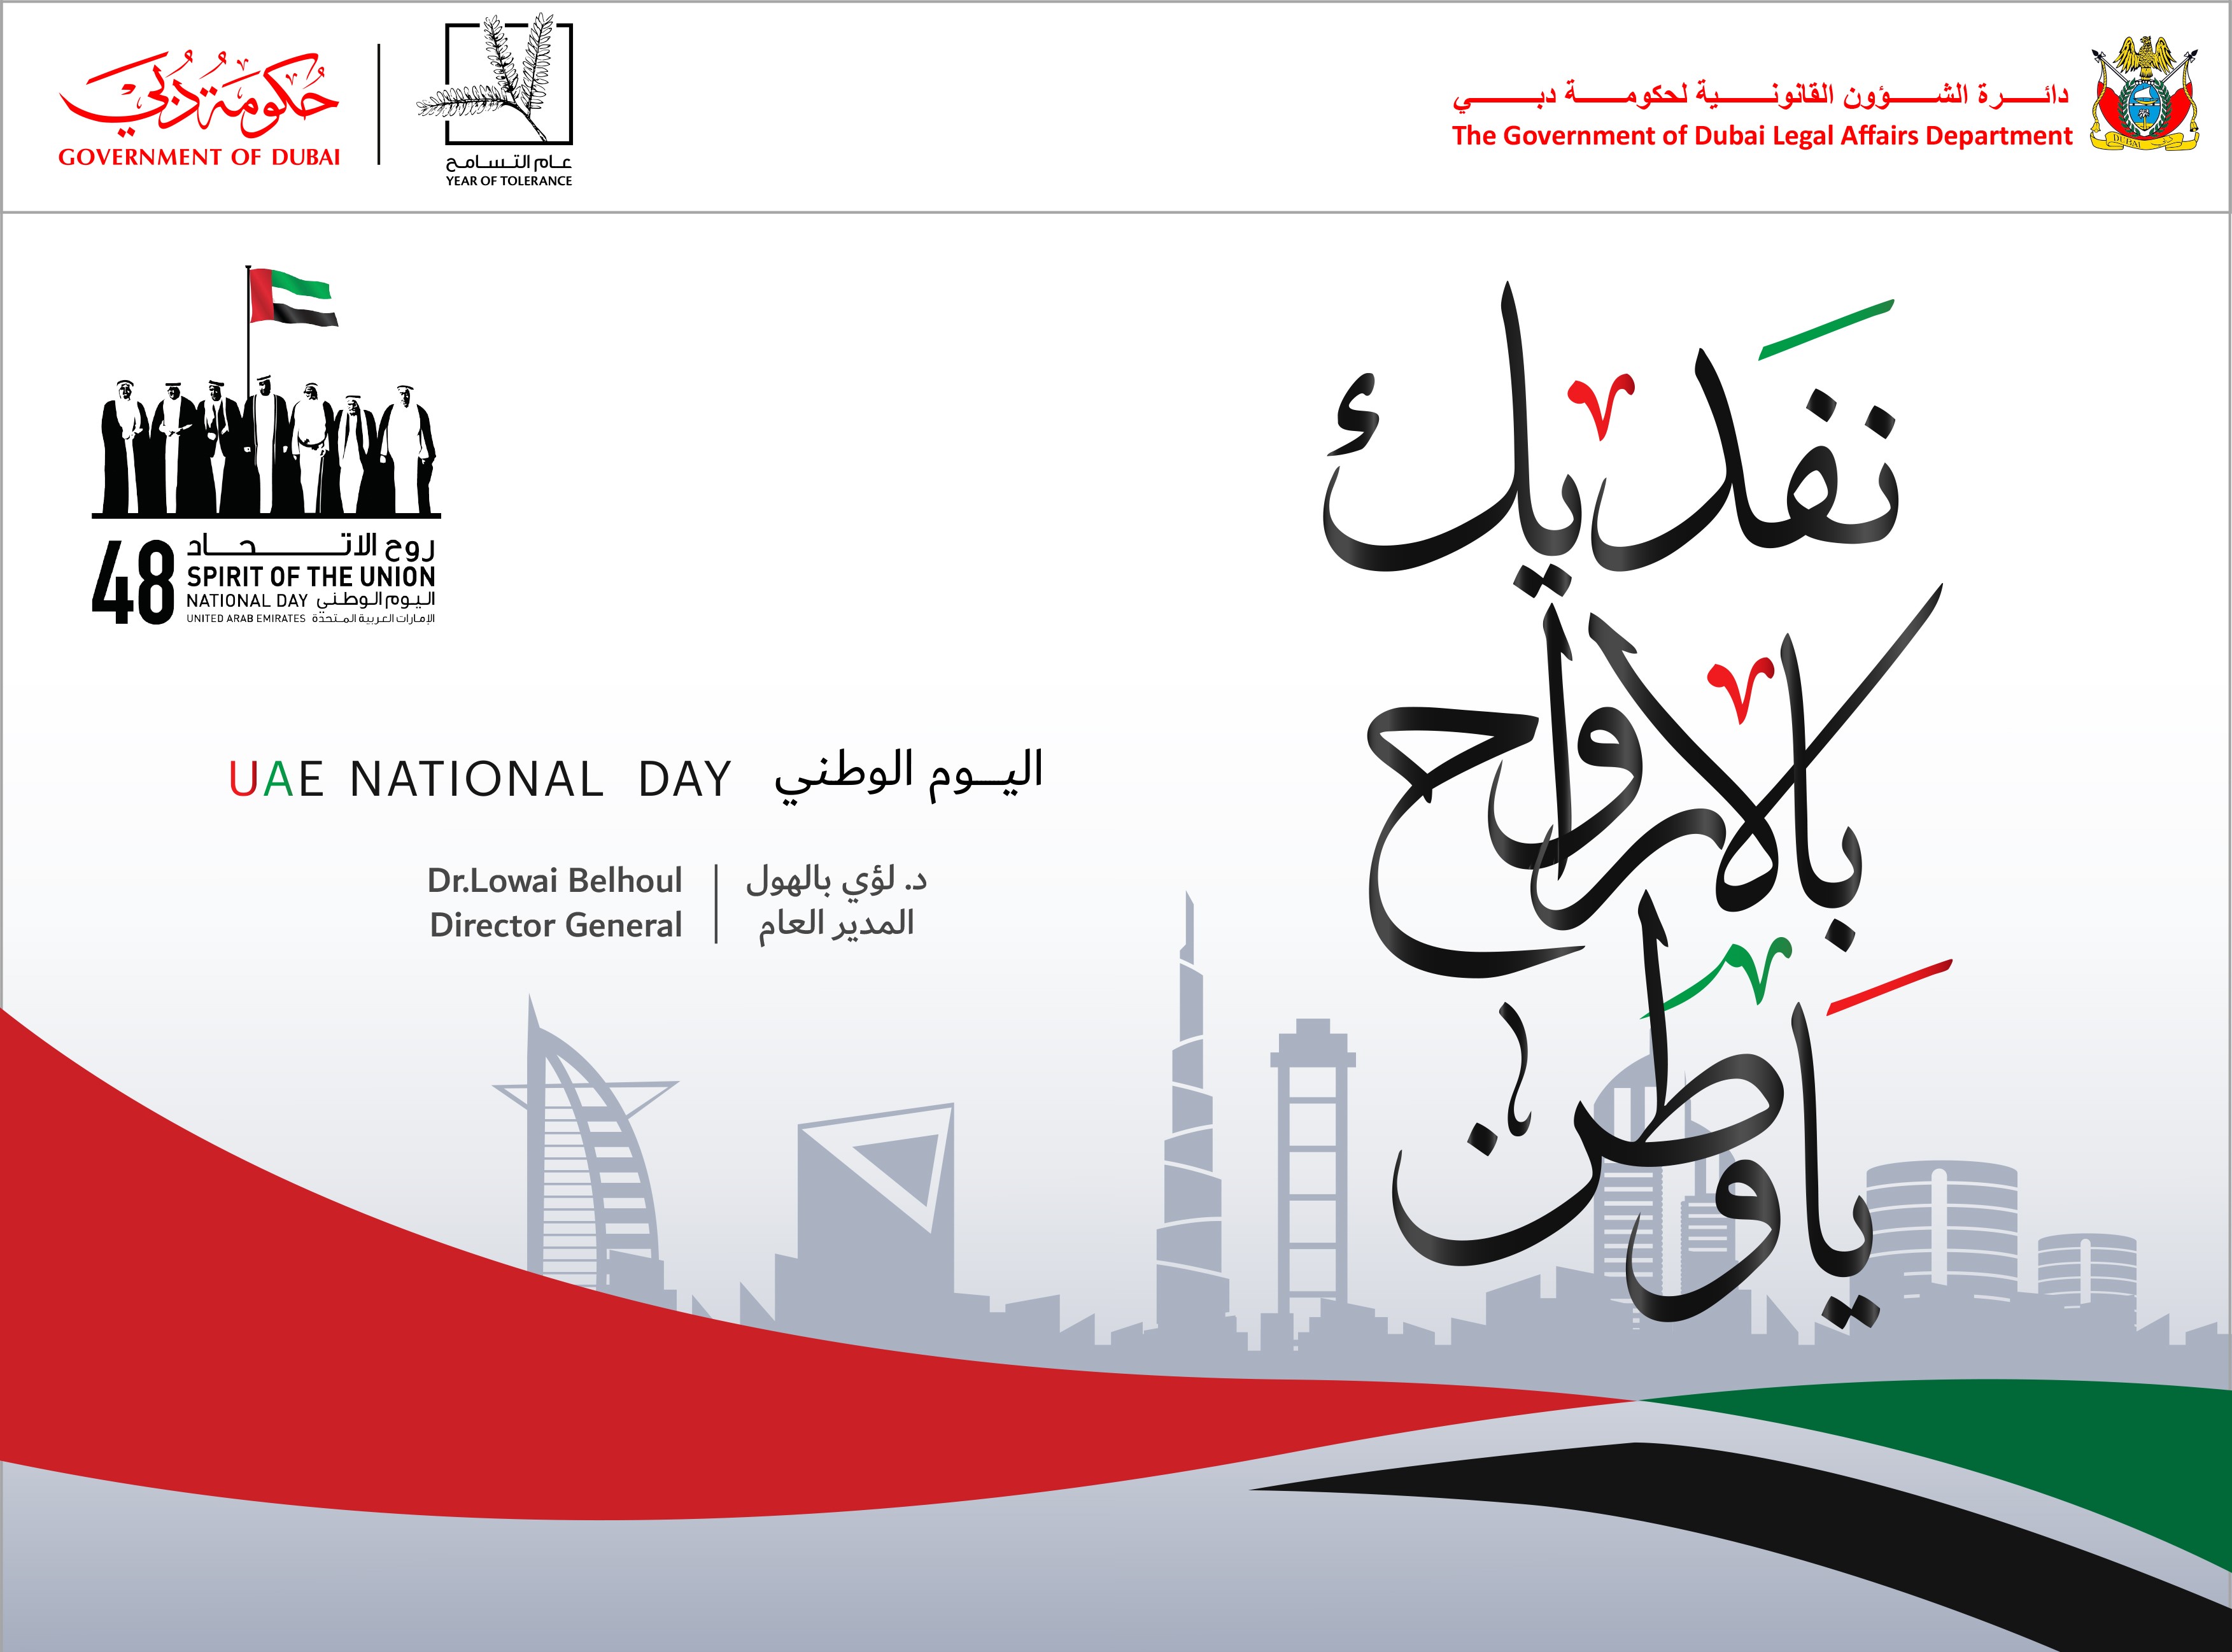 Words of His Excellency Dr. Lowai Mohamed Belhoul, Director General of the Government of Dubai Legal Affairs Department on the Occasion of the UAE’s 48th National Day